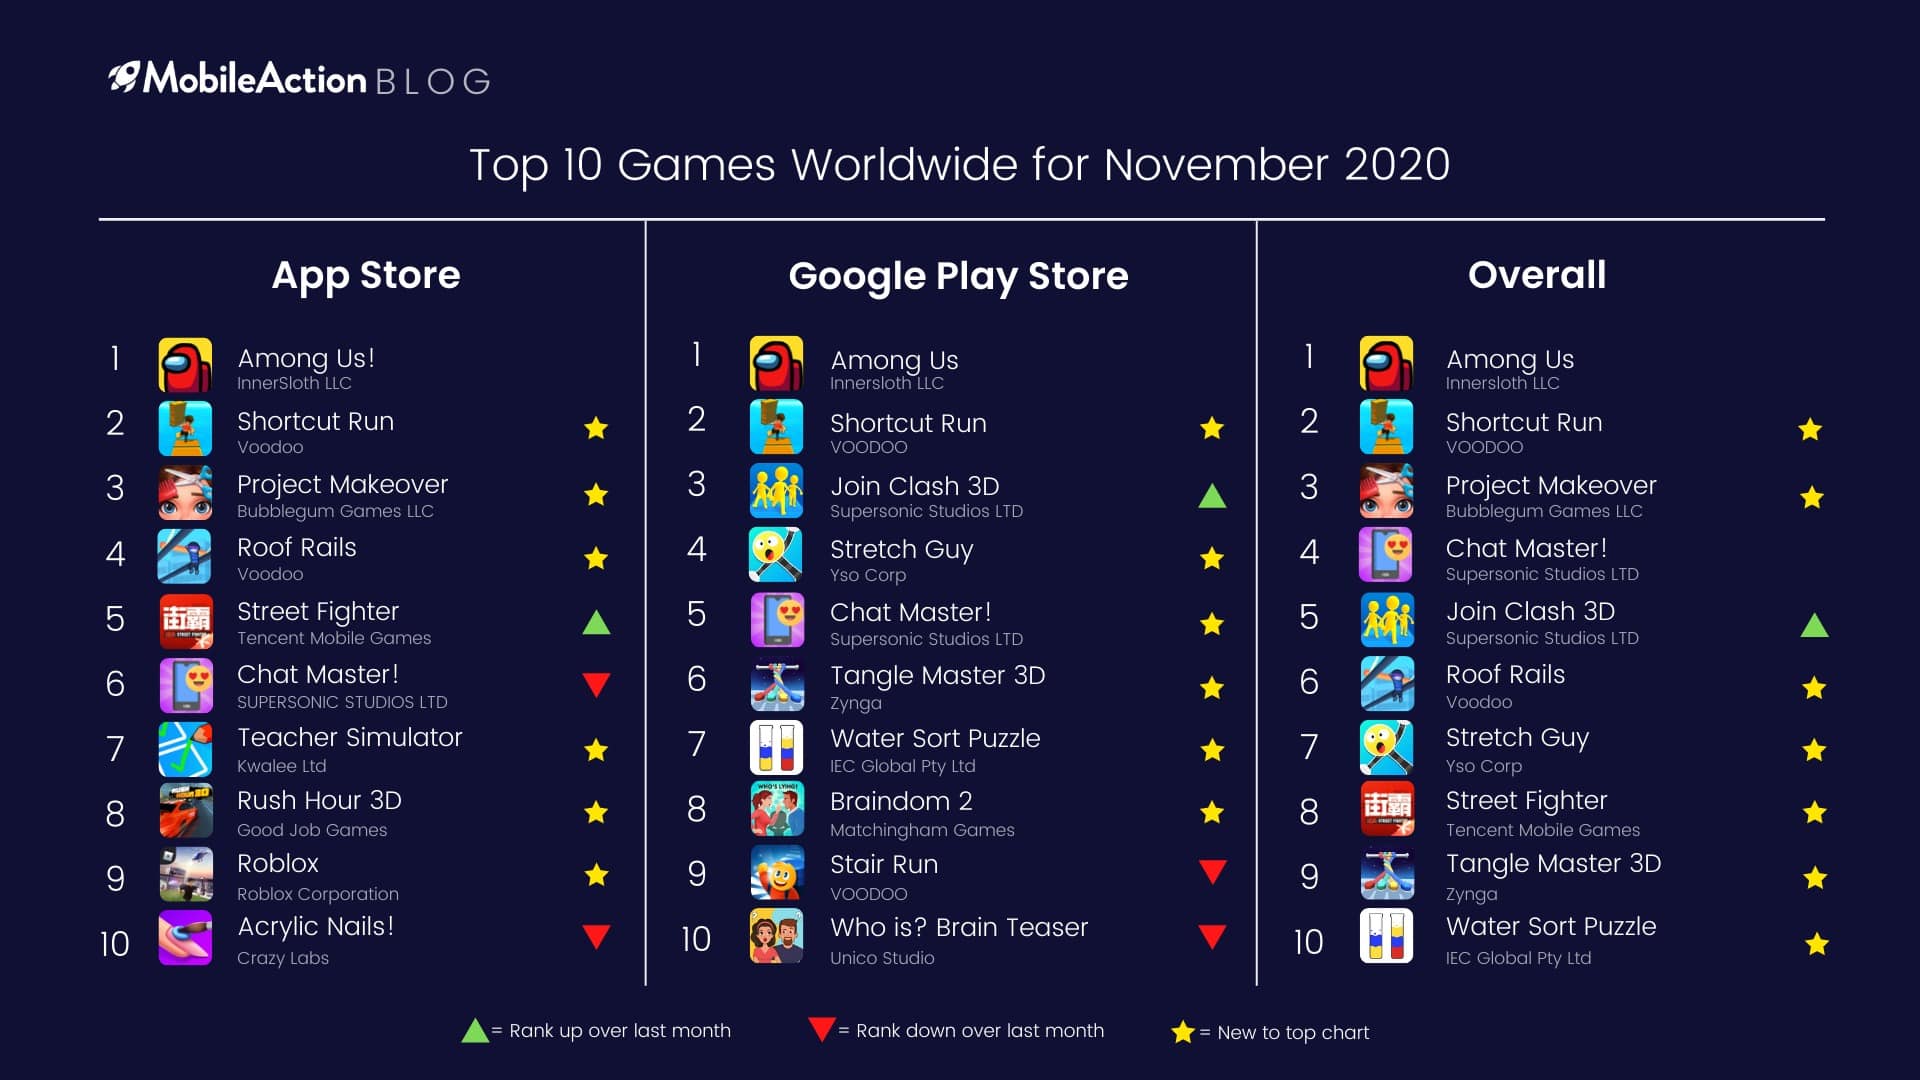 Top 10 Games Worldwide for November 2020